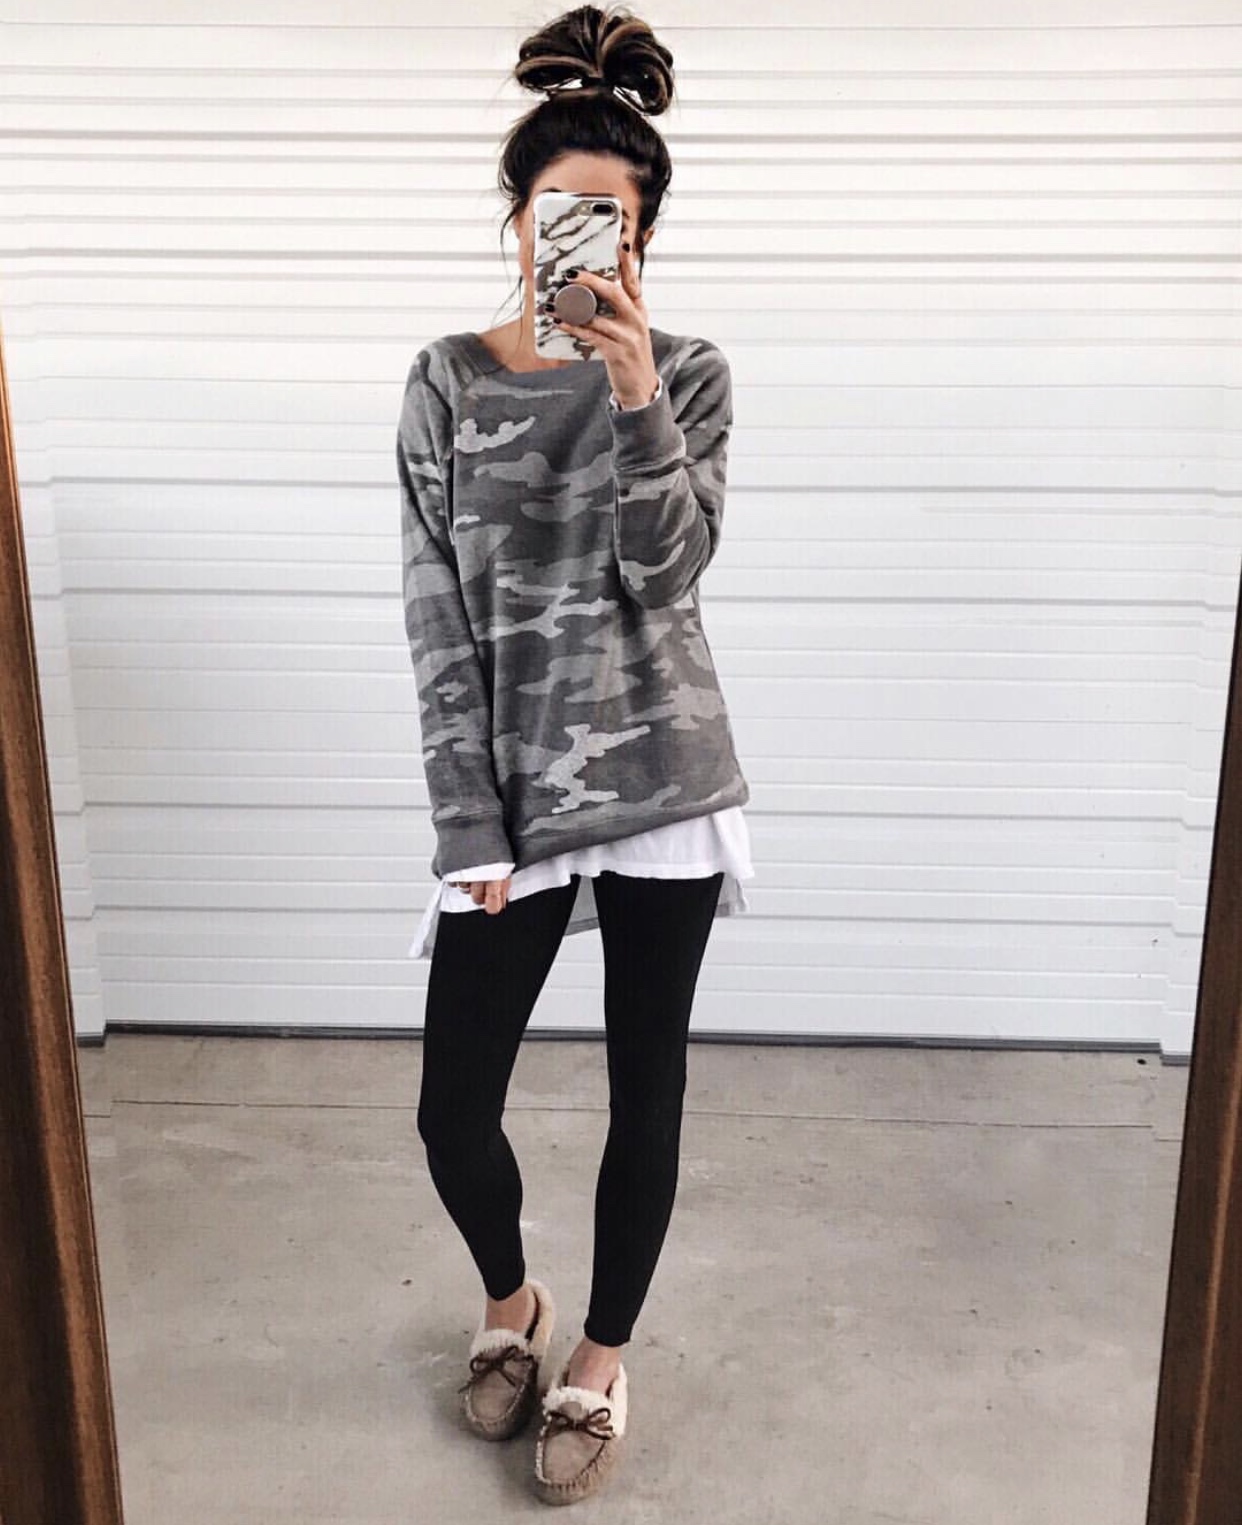 Hoodie with Leggings Outfits (19 ideas & outfits)